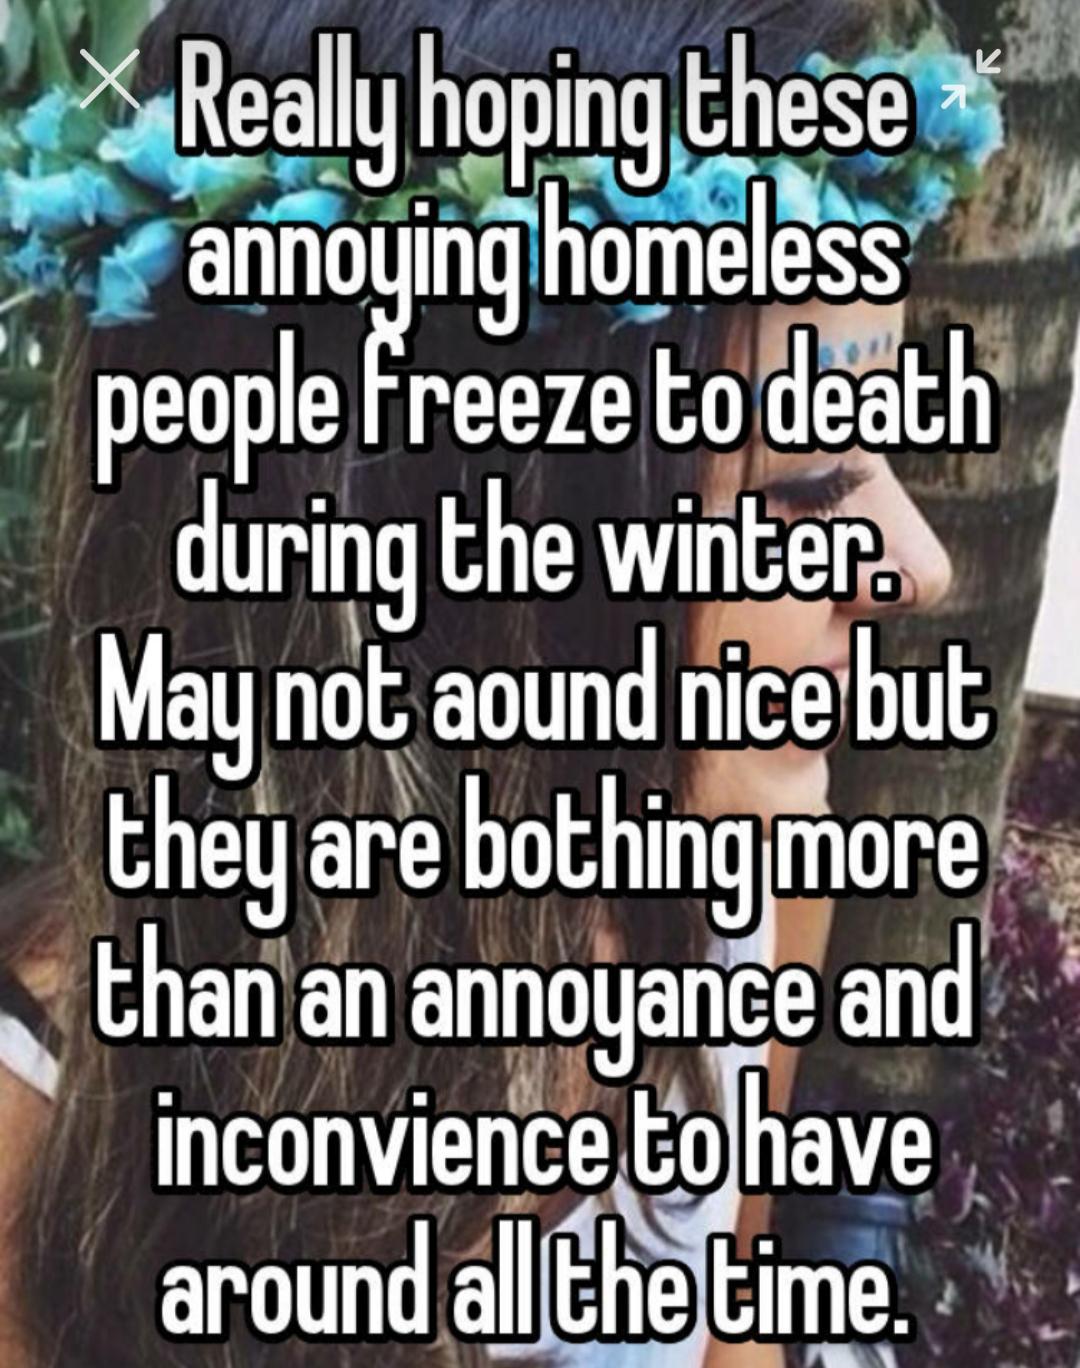 photo caption - Really hoping these annoying homeless people Freeze to death during the winter. May not aound nice but they are bothing more than an annoyance and inconvience to have around all the time.